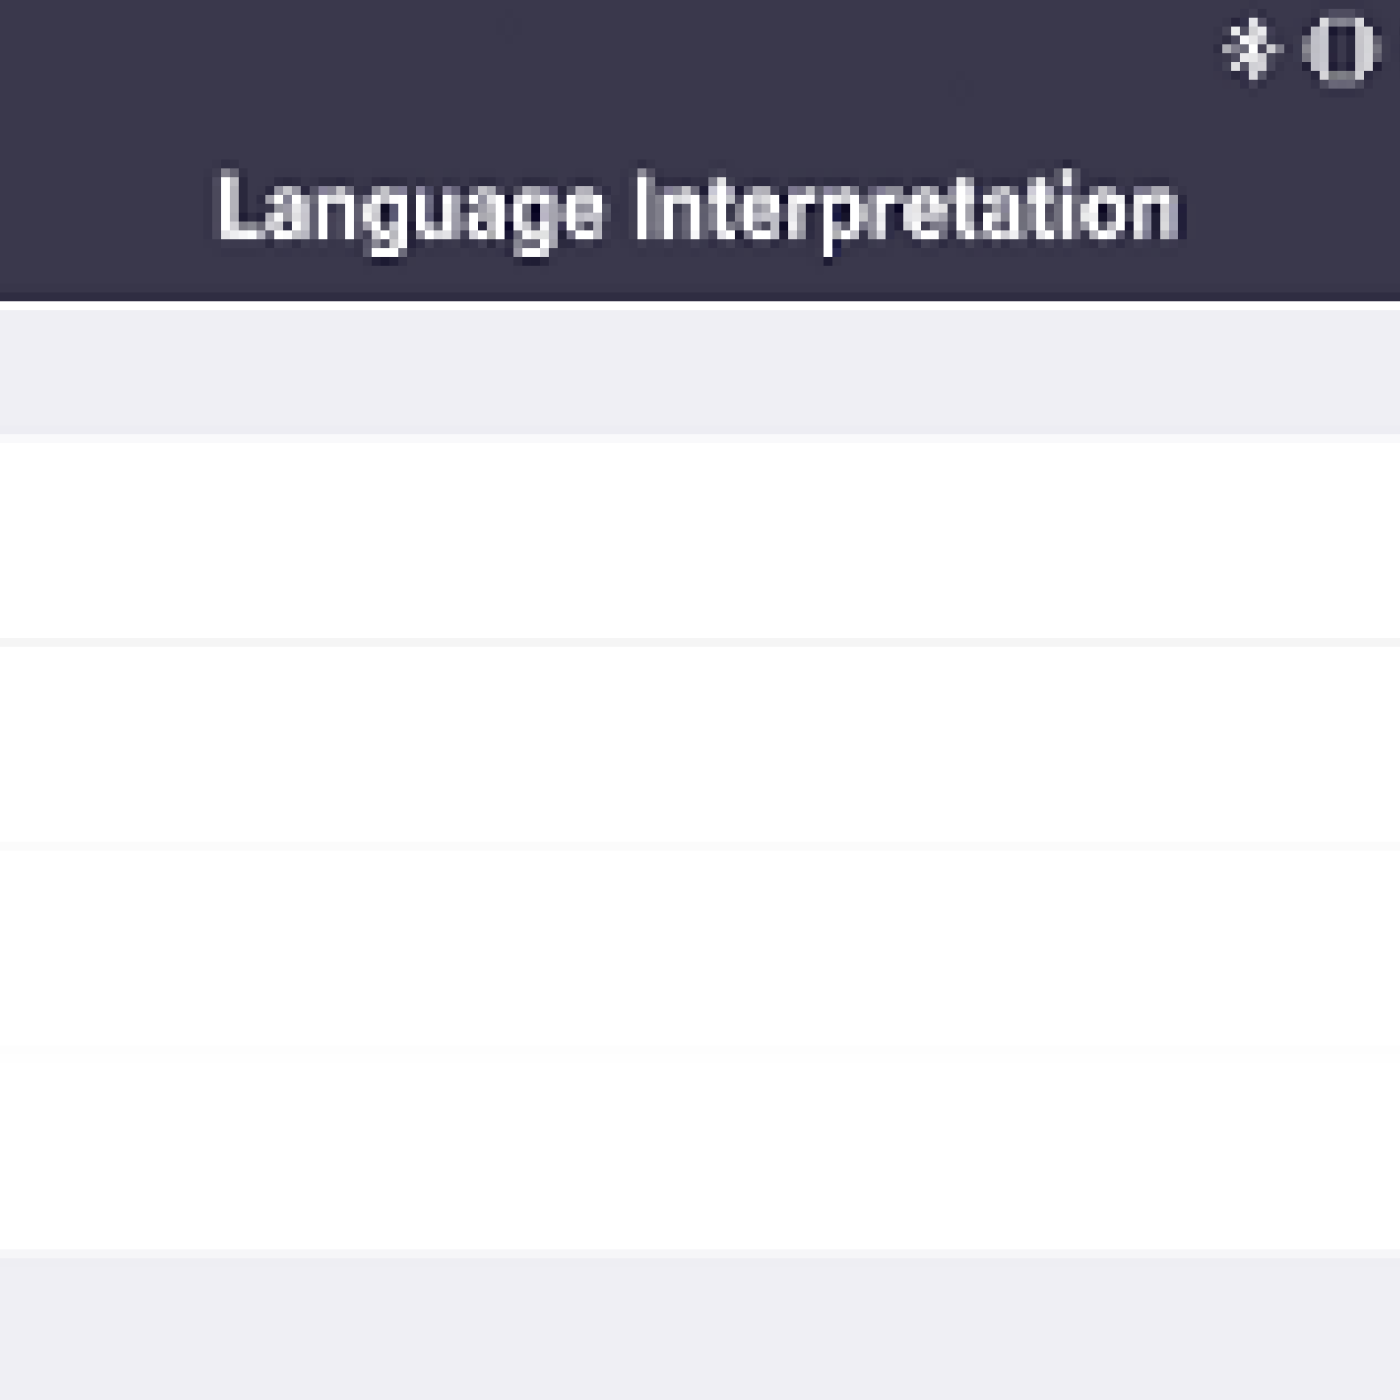 Selecting language when using a phone